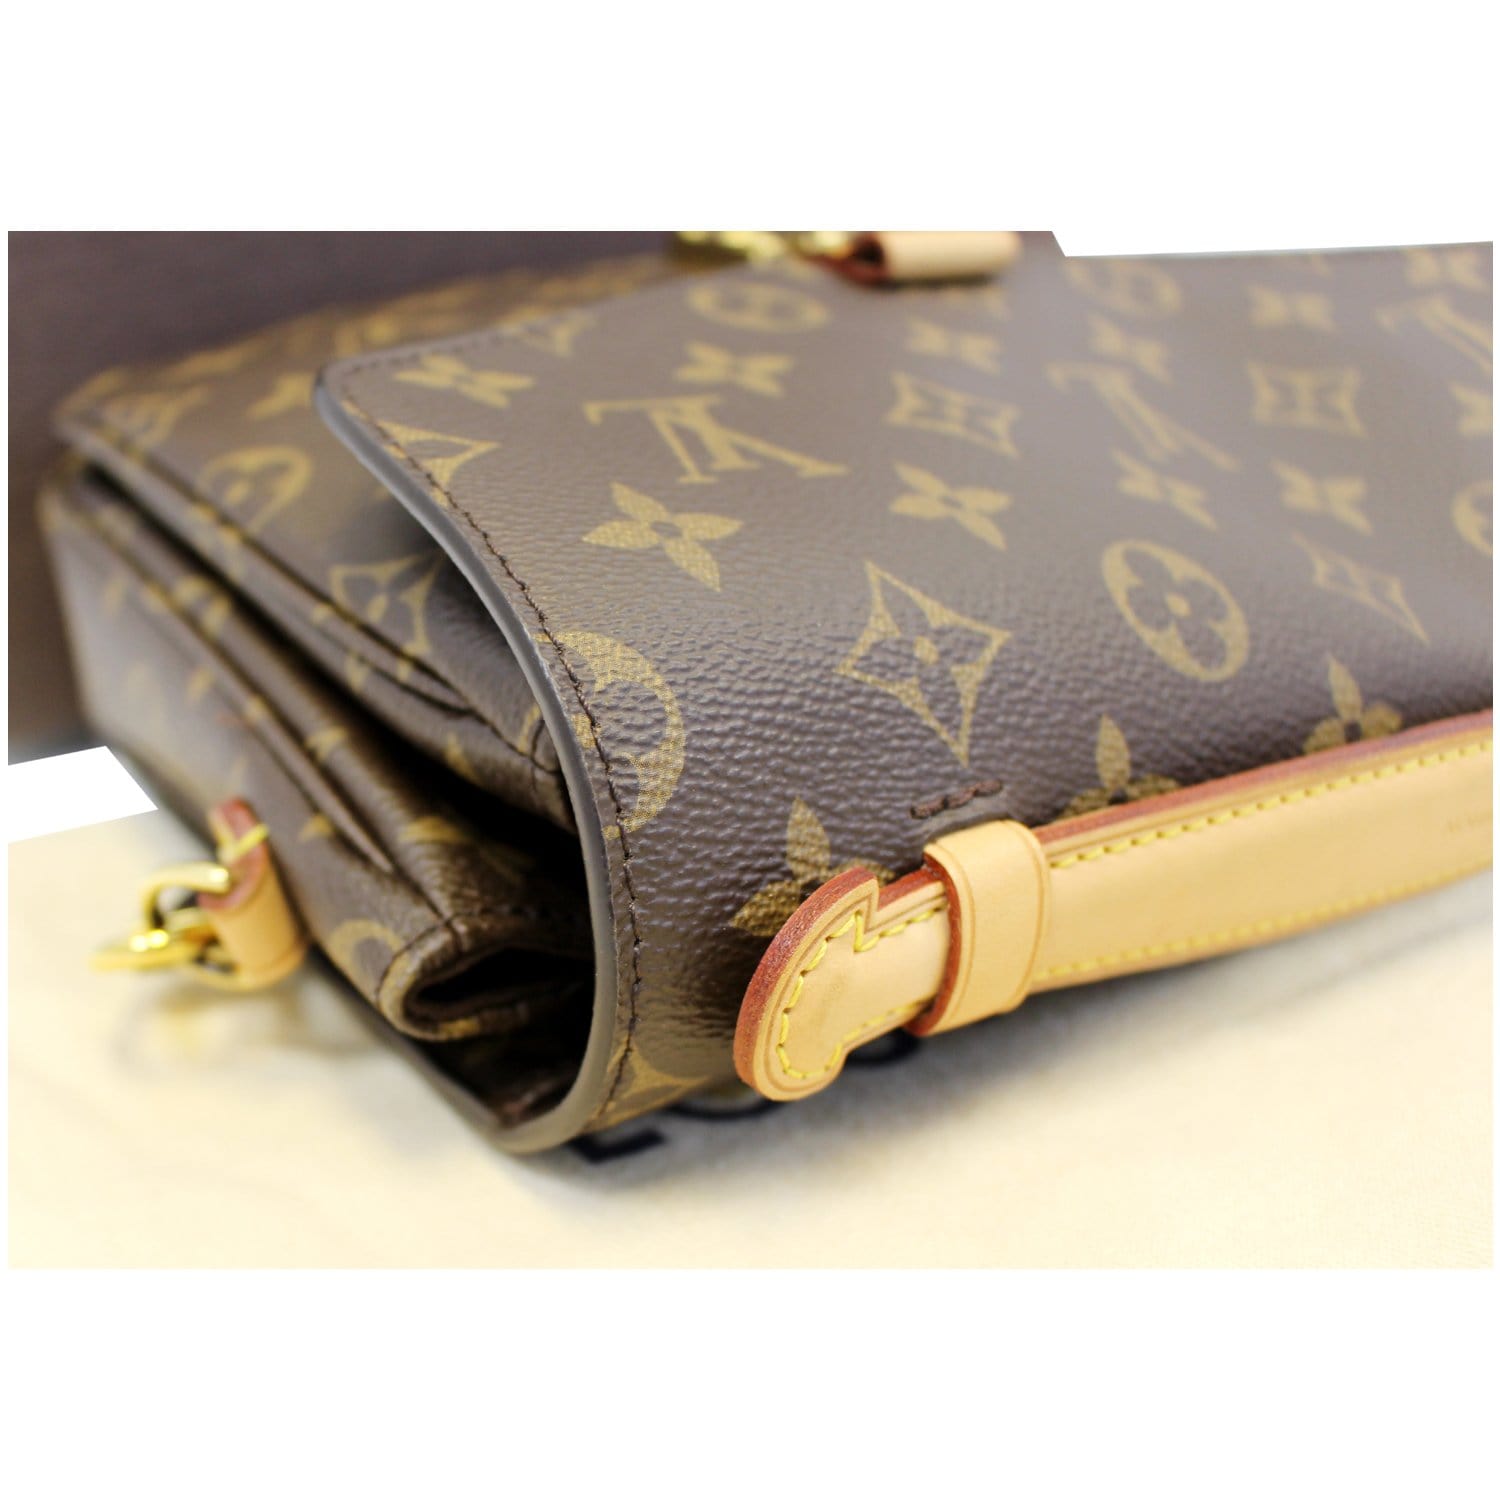 Félicie Pochette Monogram Canvas - Wallets and Small Leather Goods